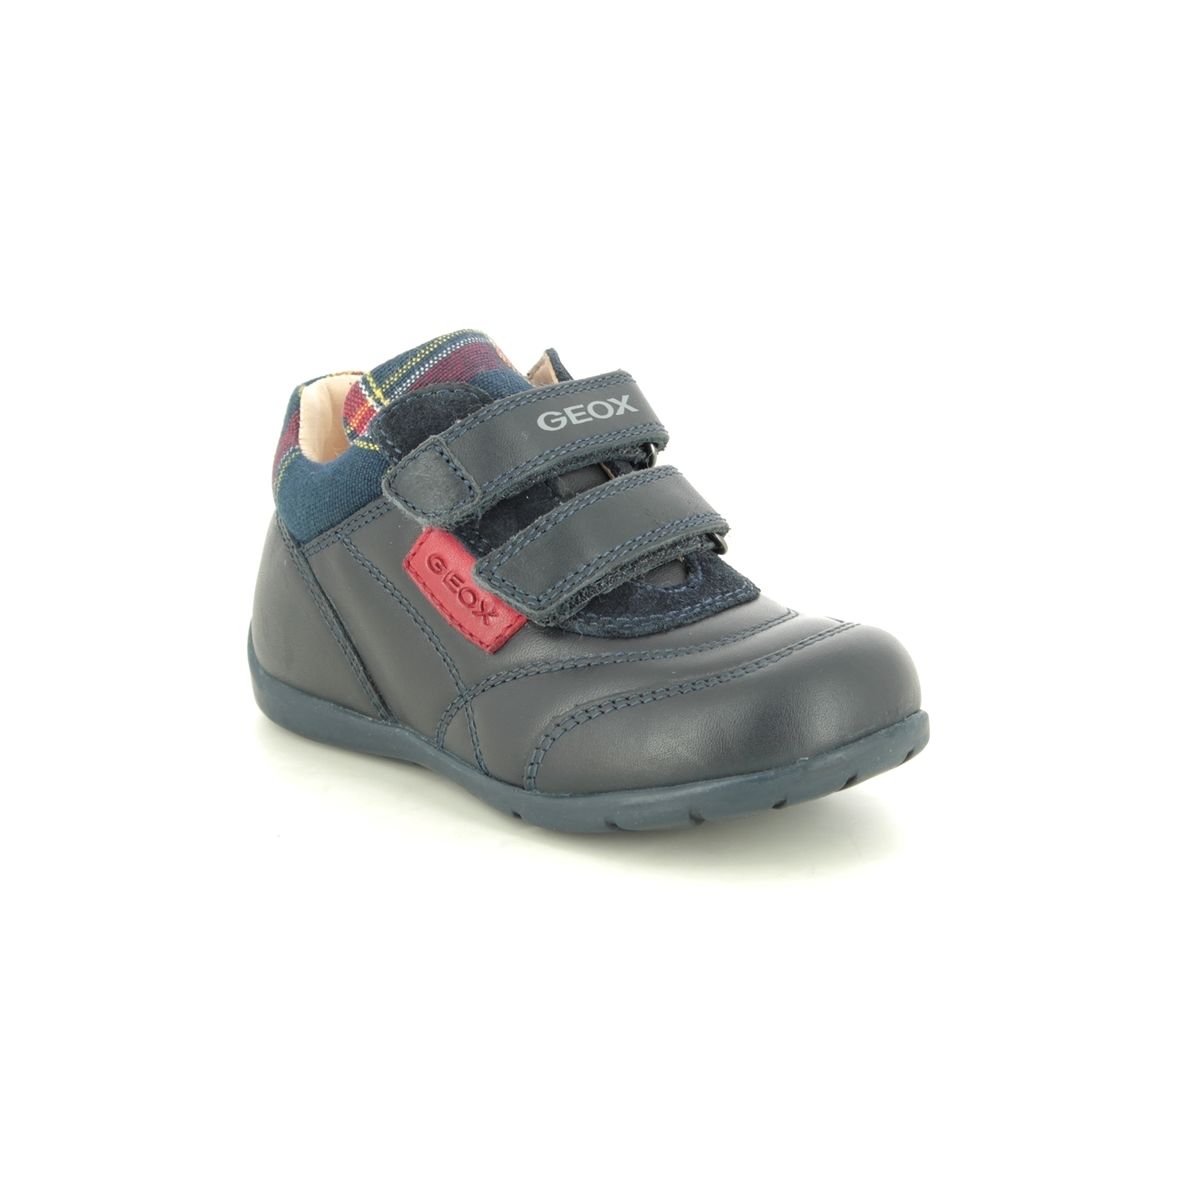 Geox Kaytan Navy Kids Toddler Boys Boots B0450A-C4021 in a Plain  in Size 25